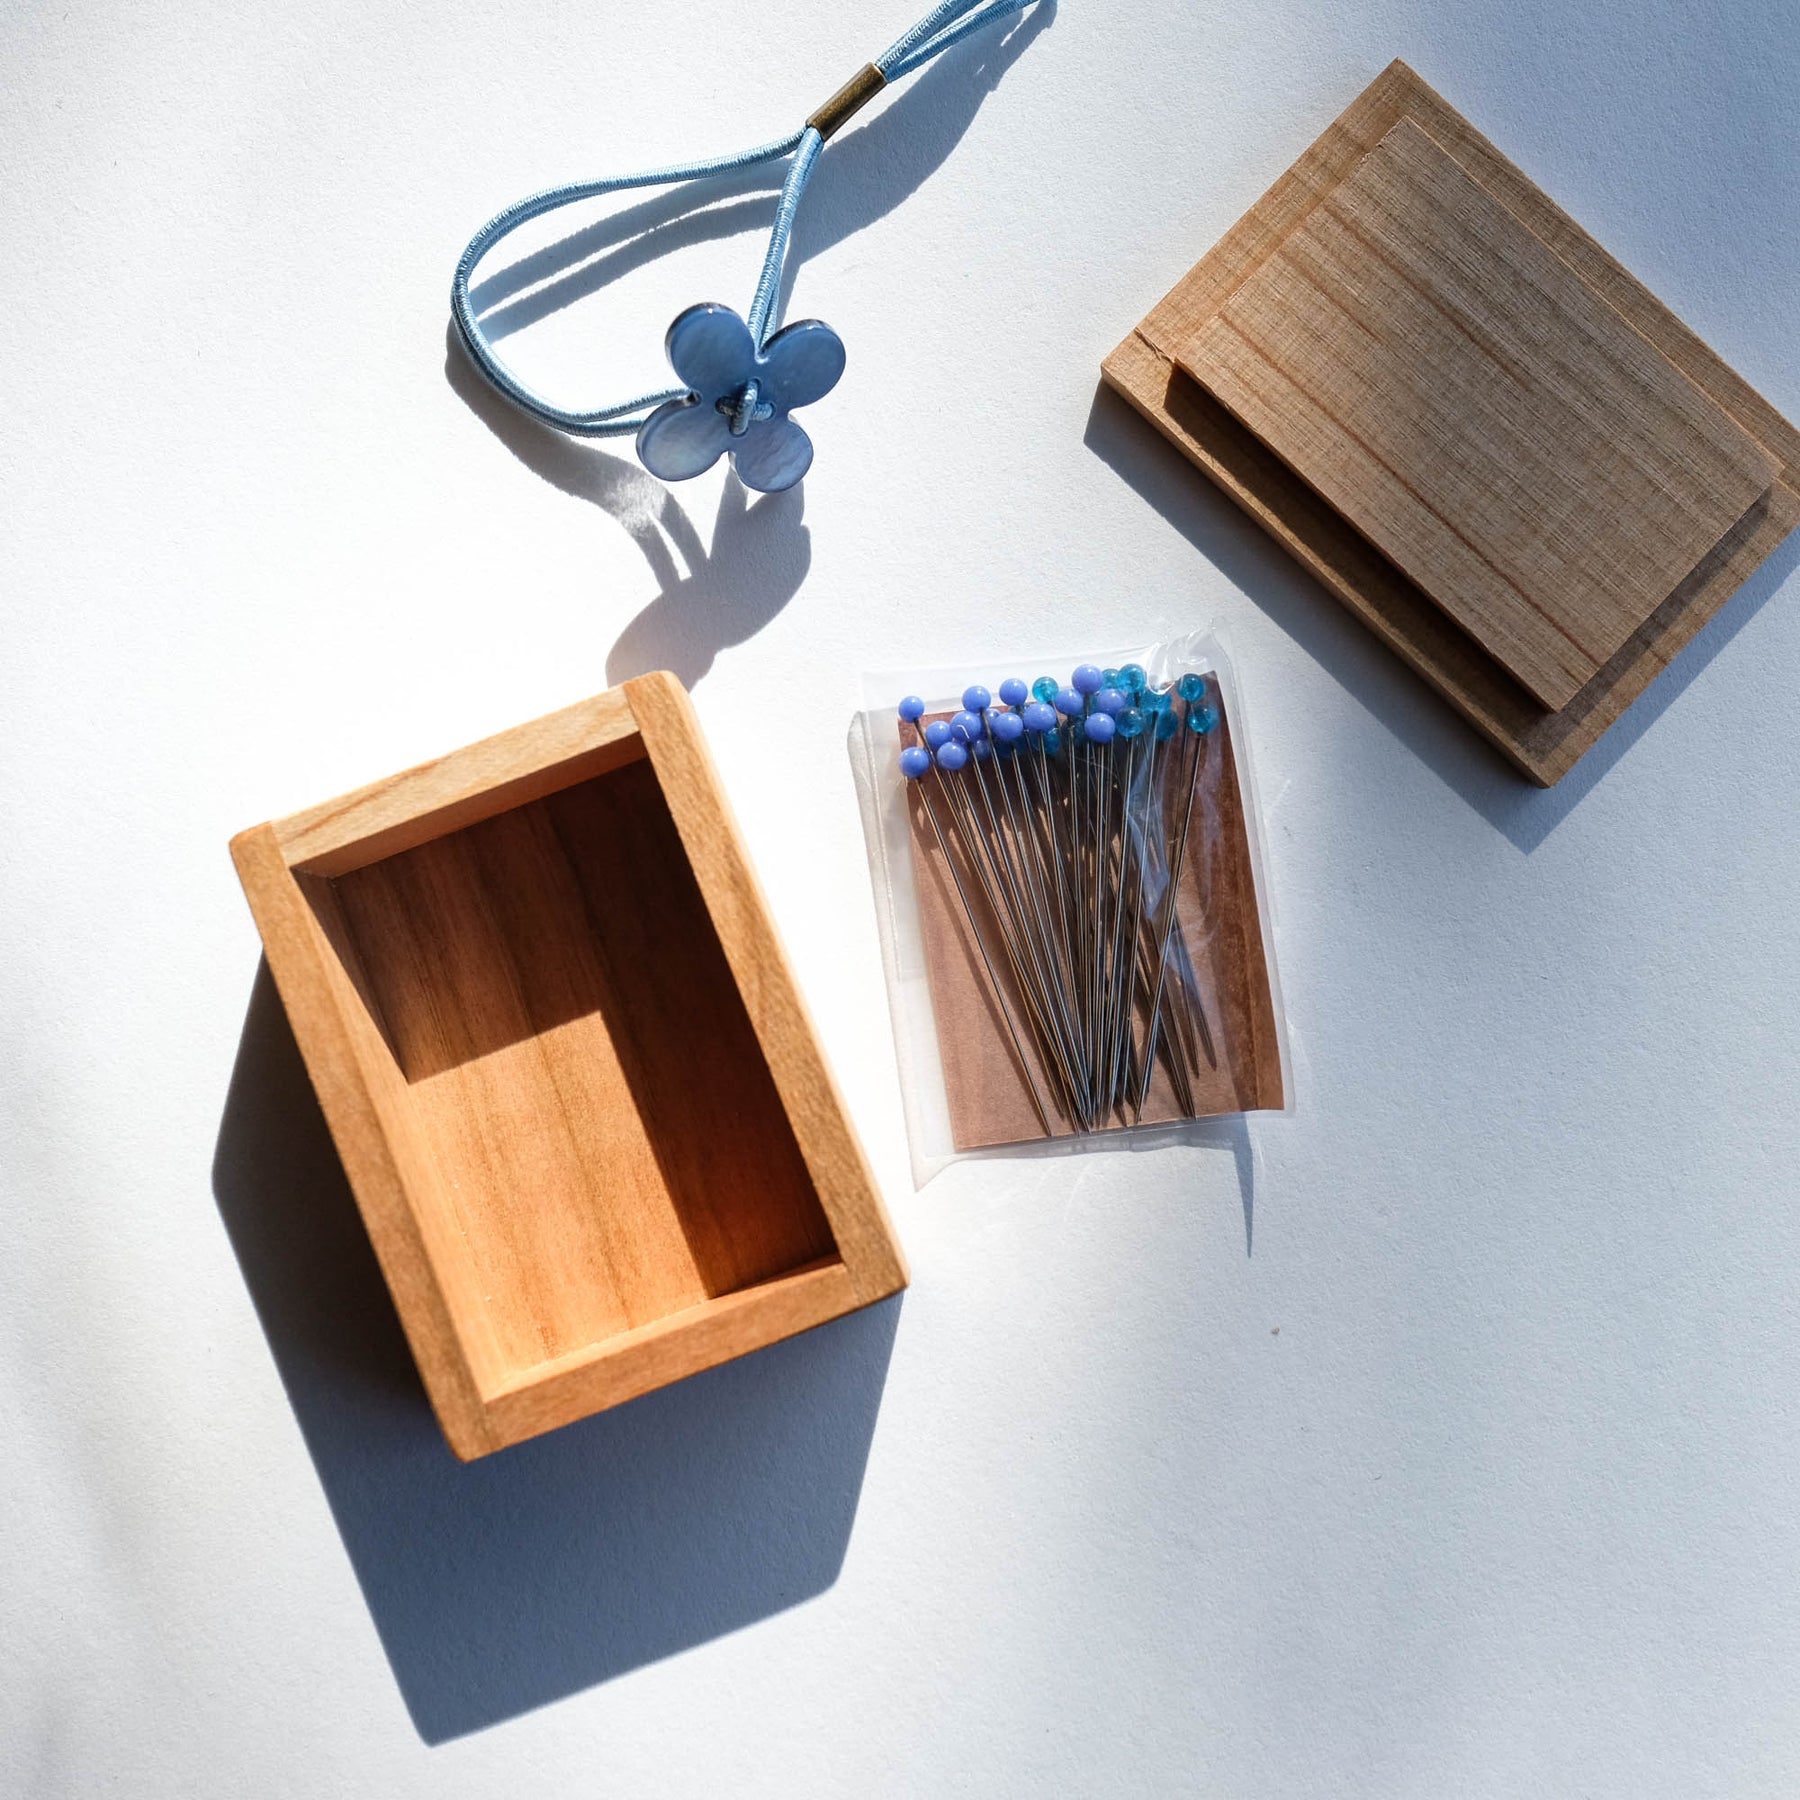 Glass Sewing Pins in a Cherry-wood Box